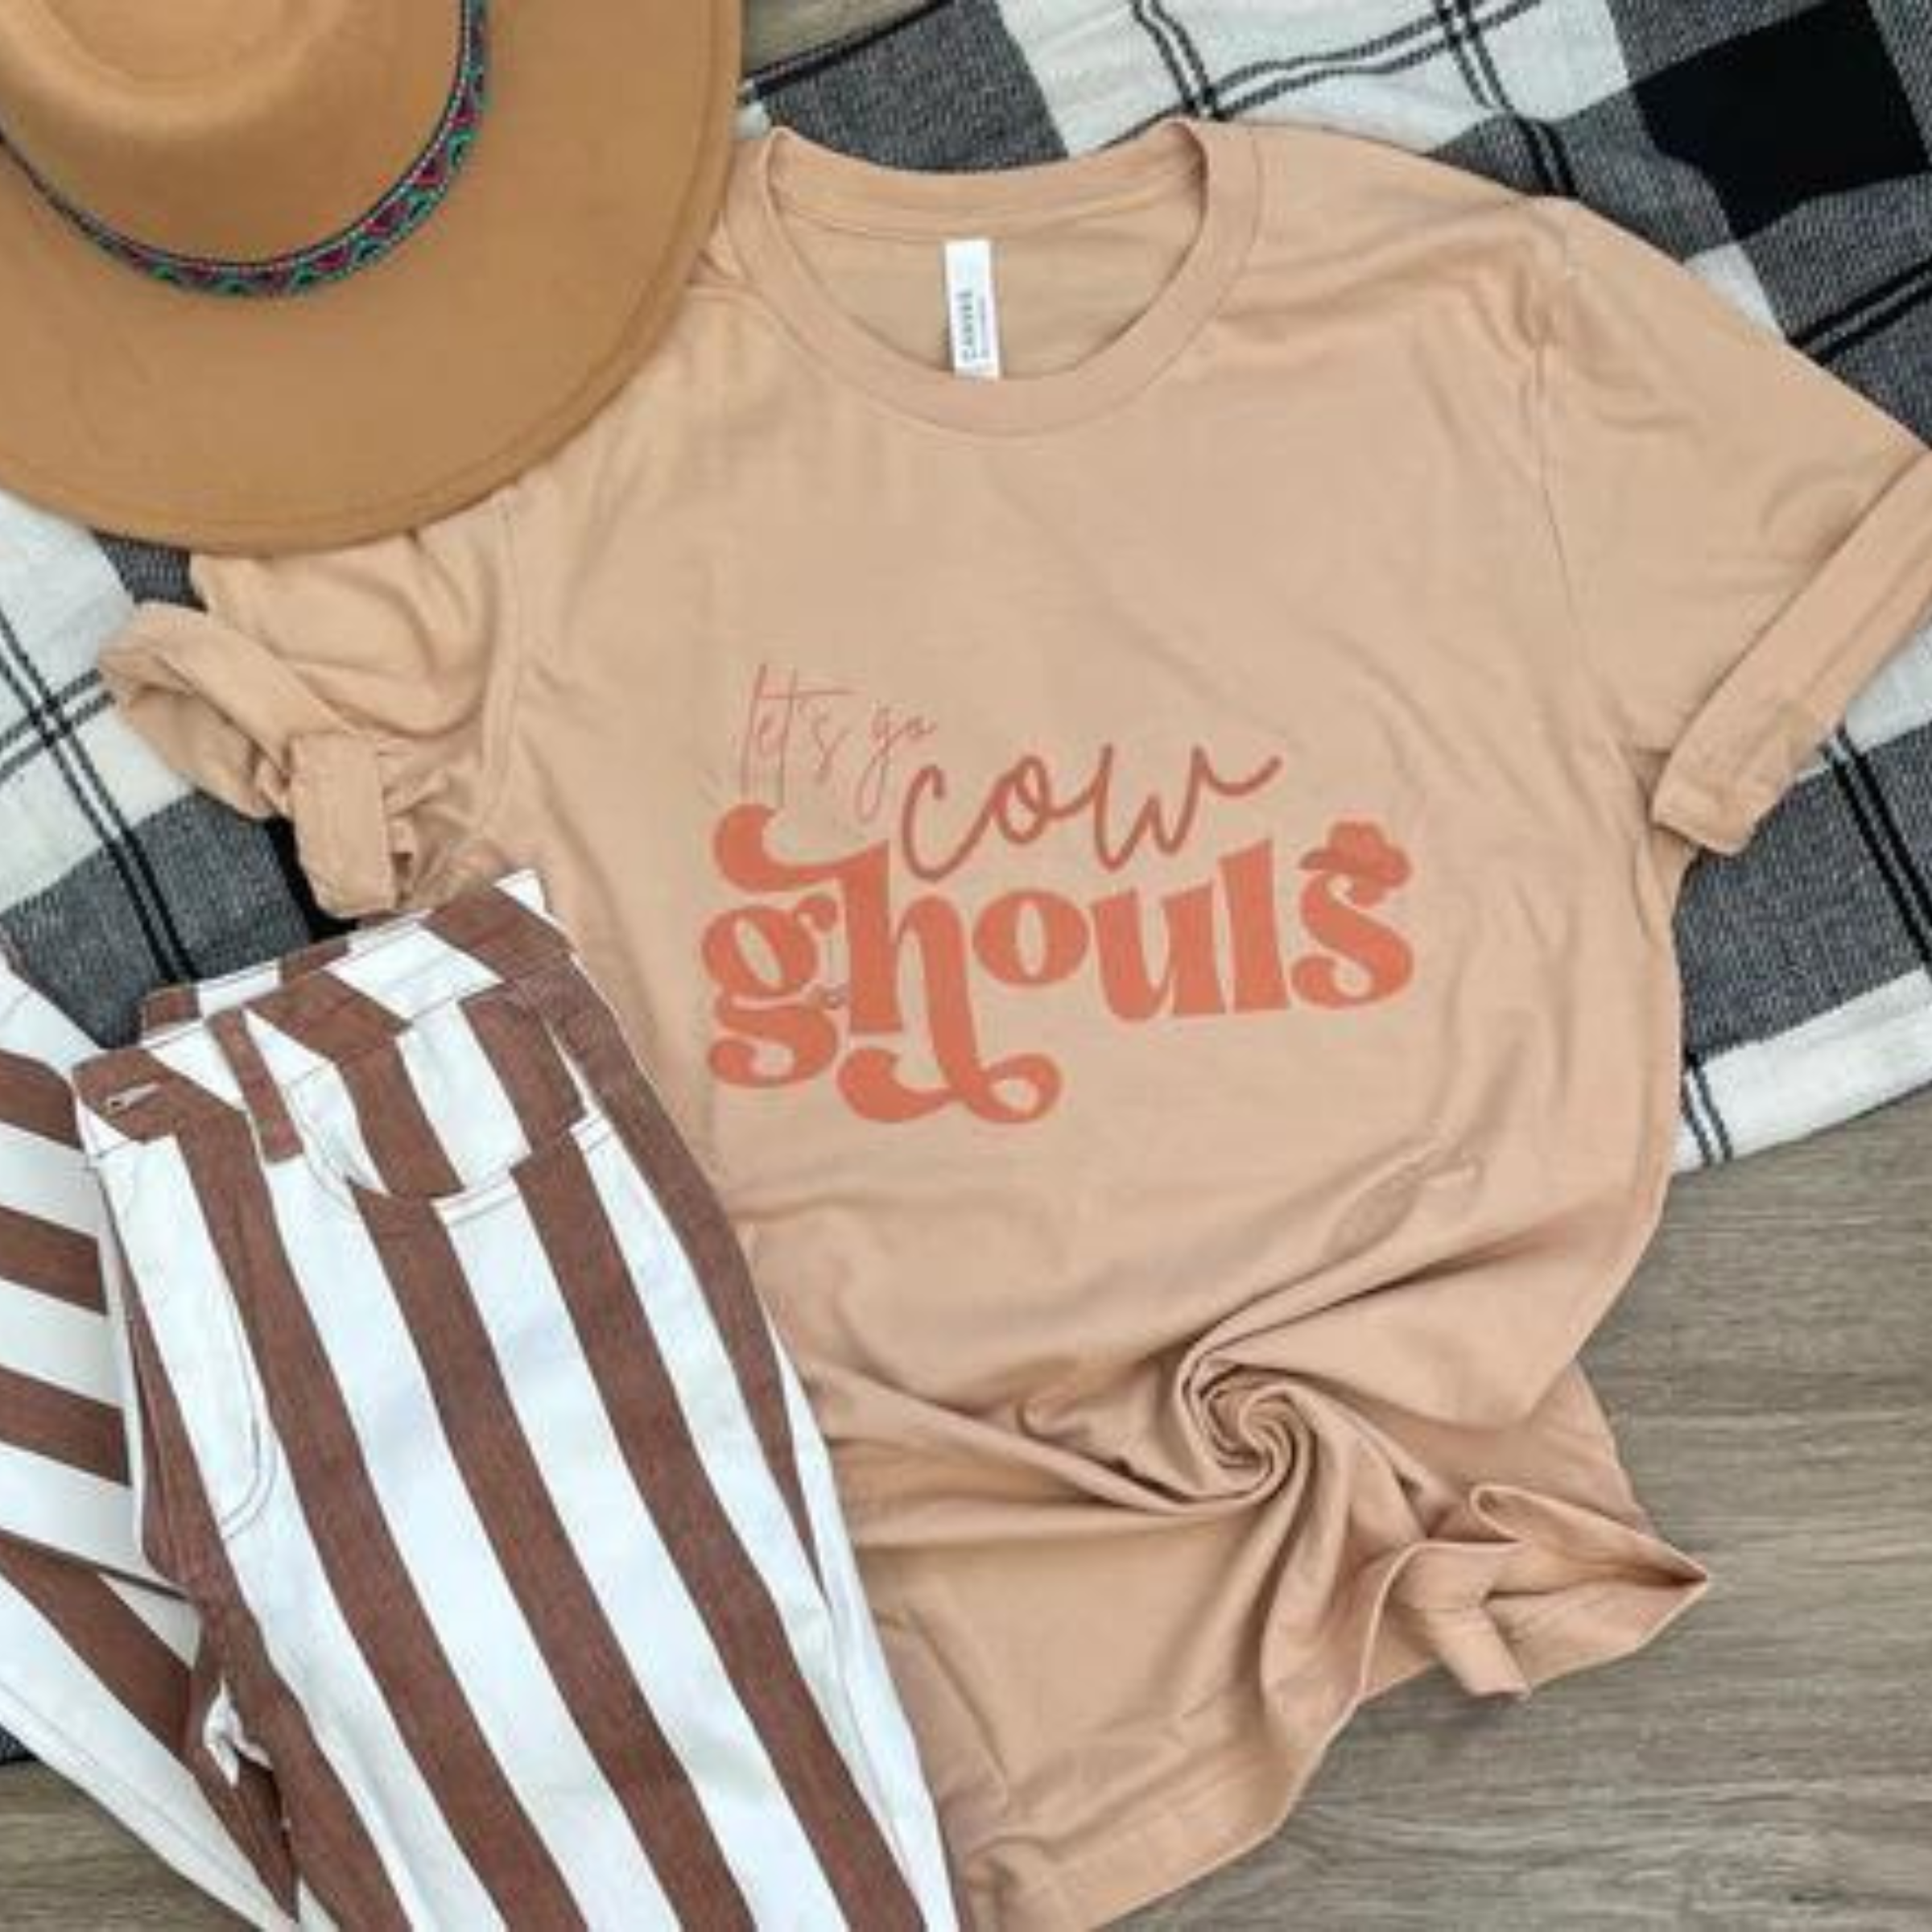 This tan graphic tee says "Let's Go Cow Ghouls" in orange, various fun fonts. This is a Bella + Canvas tee with short sleeves and crew neck style. It is shown as a flat lay and paired with a camel felt hat with a colorful hat band and brown and white vertical striped jeans. The sleeves of the tee are also shown folded up once. 